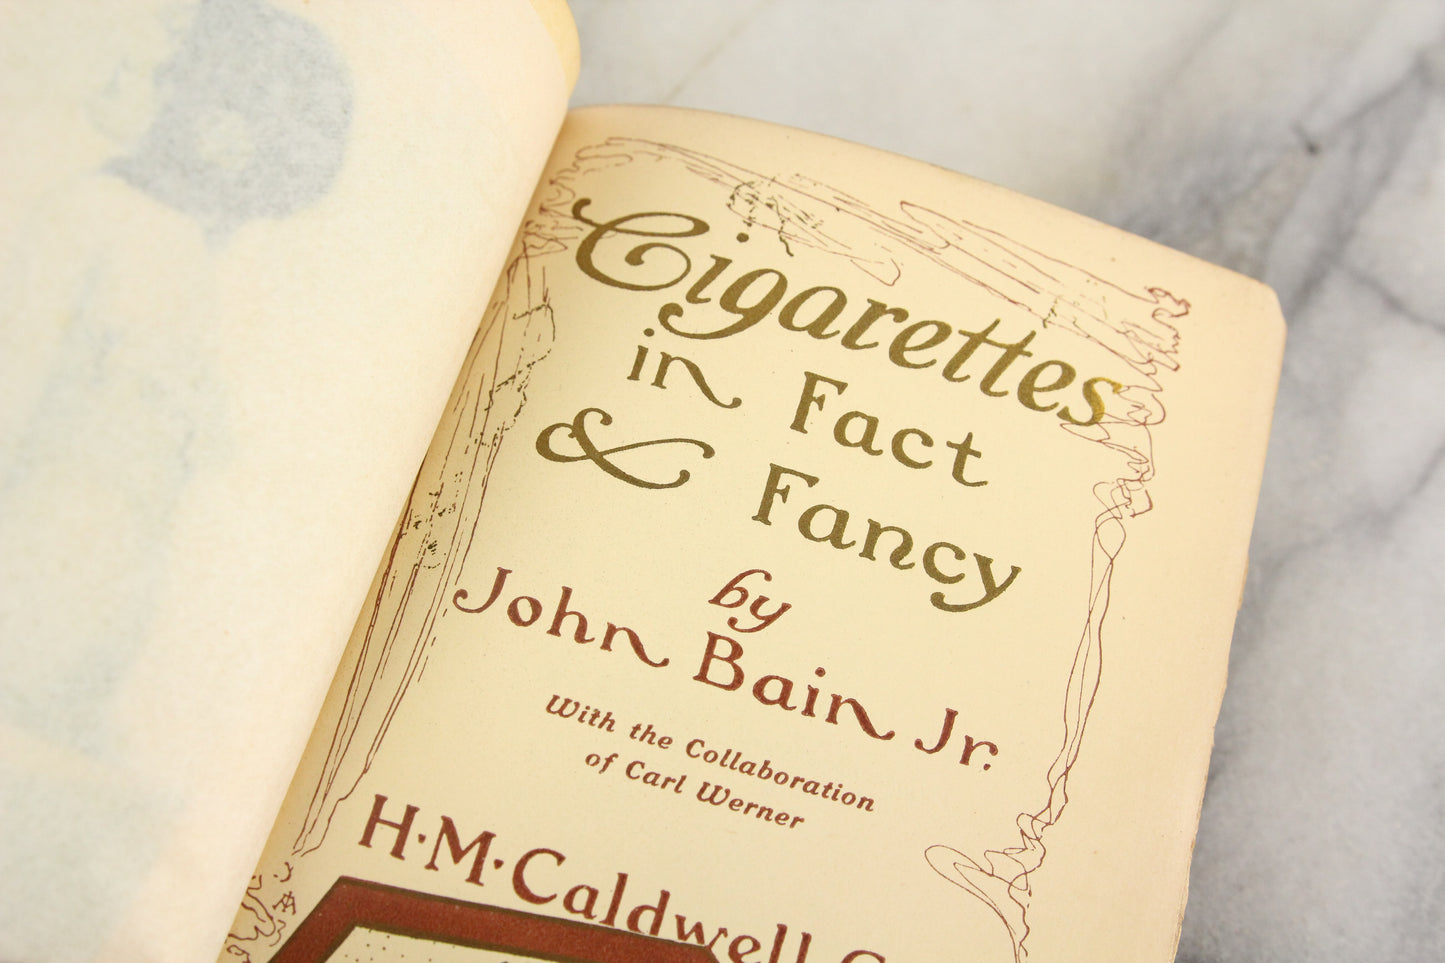 Cigarettes in Fact and Fancy by John Bain Jr., Copyright 1906